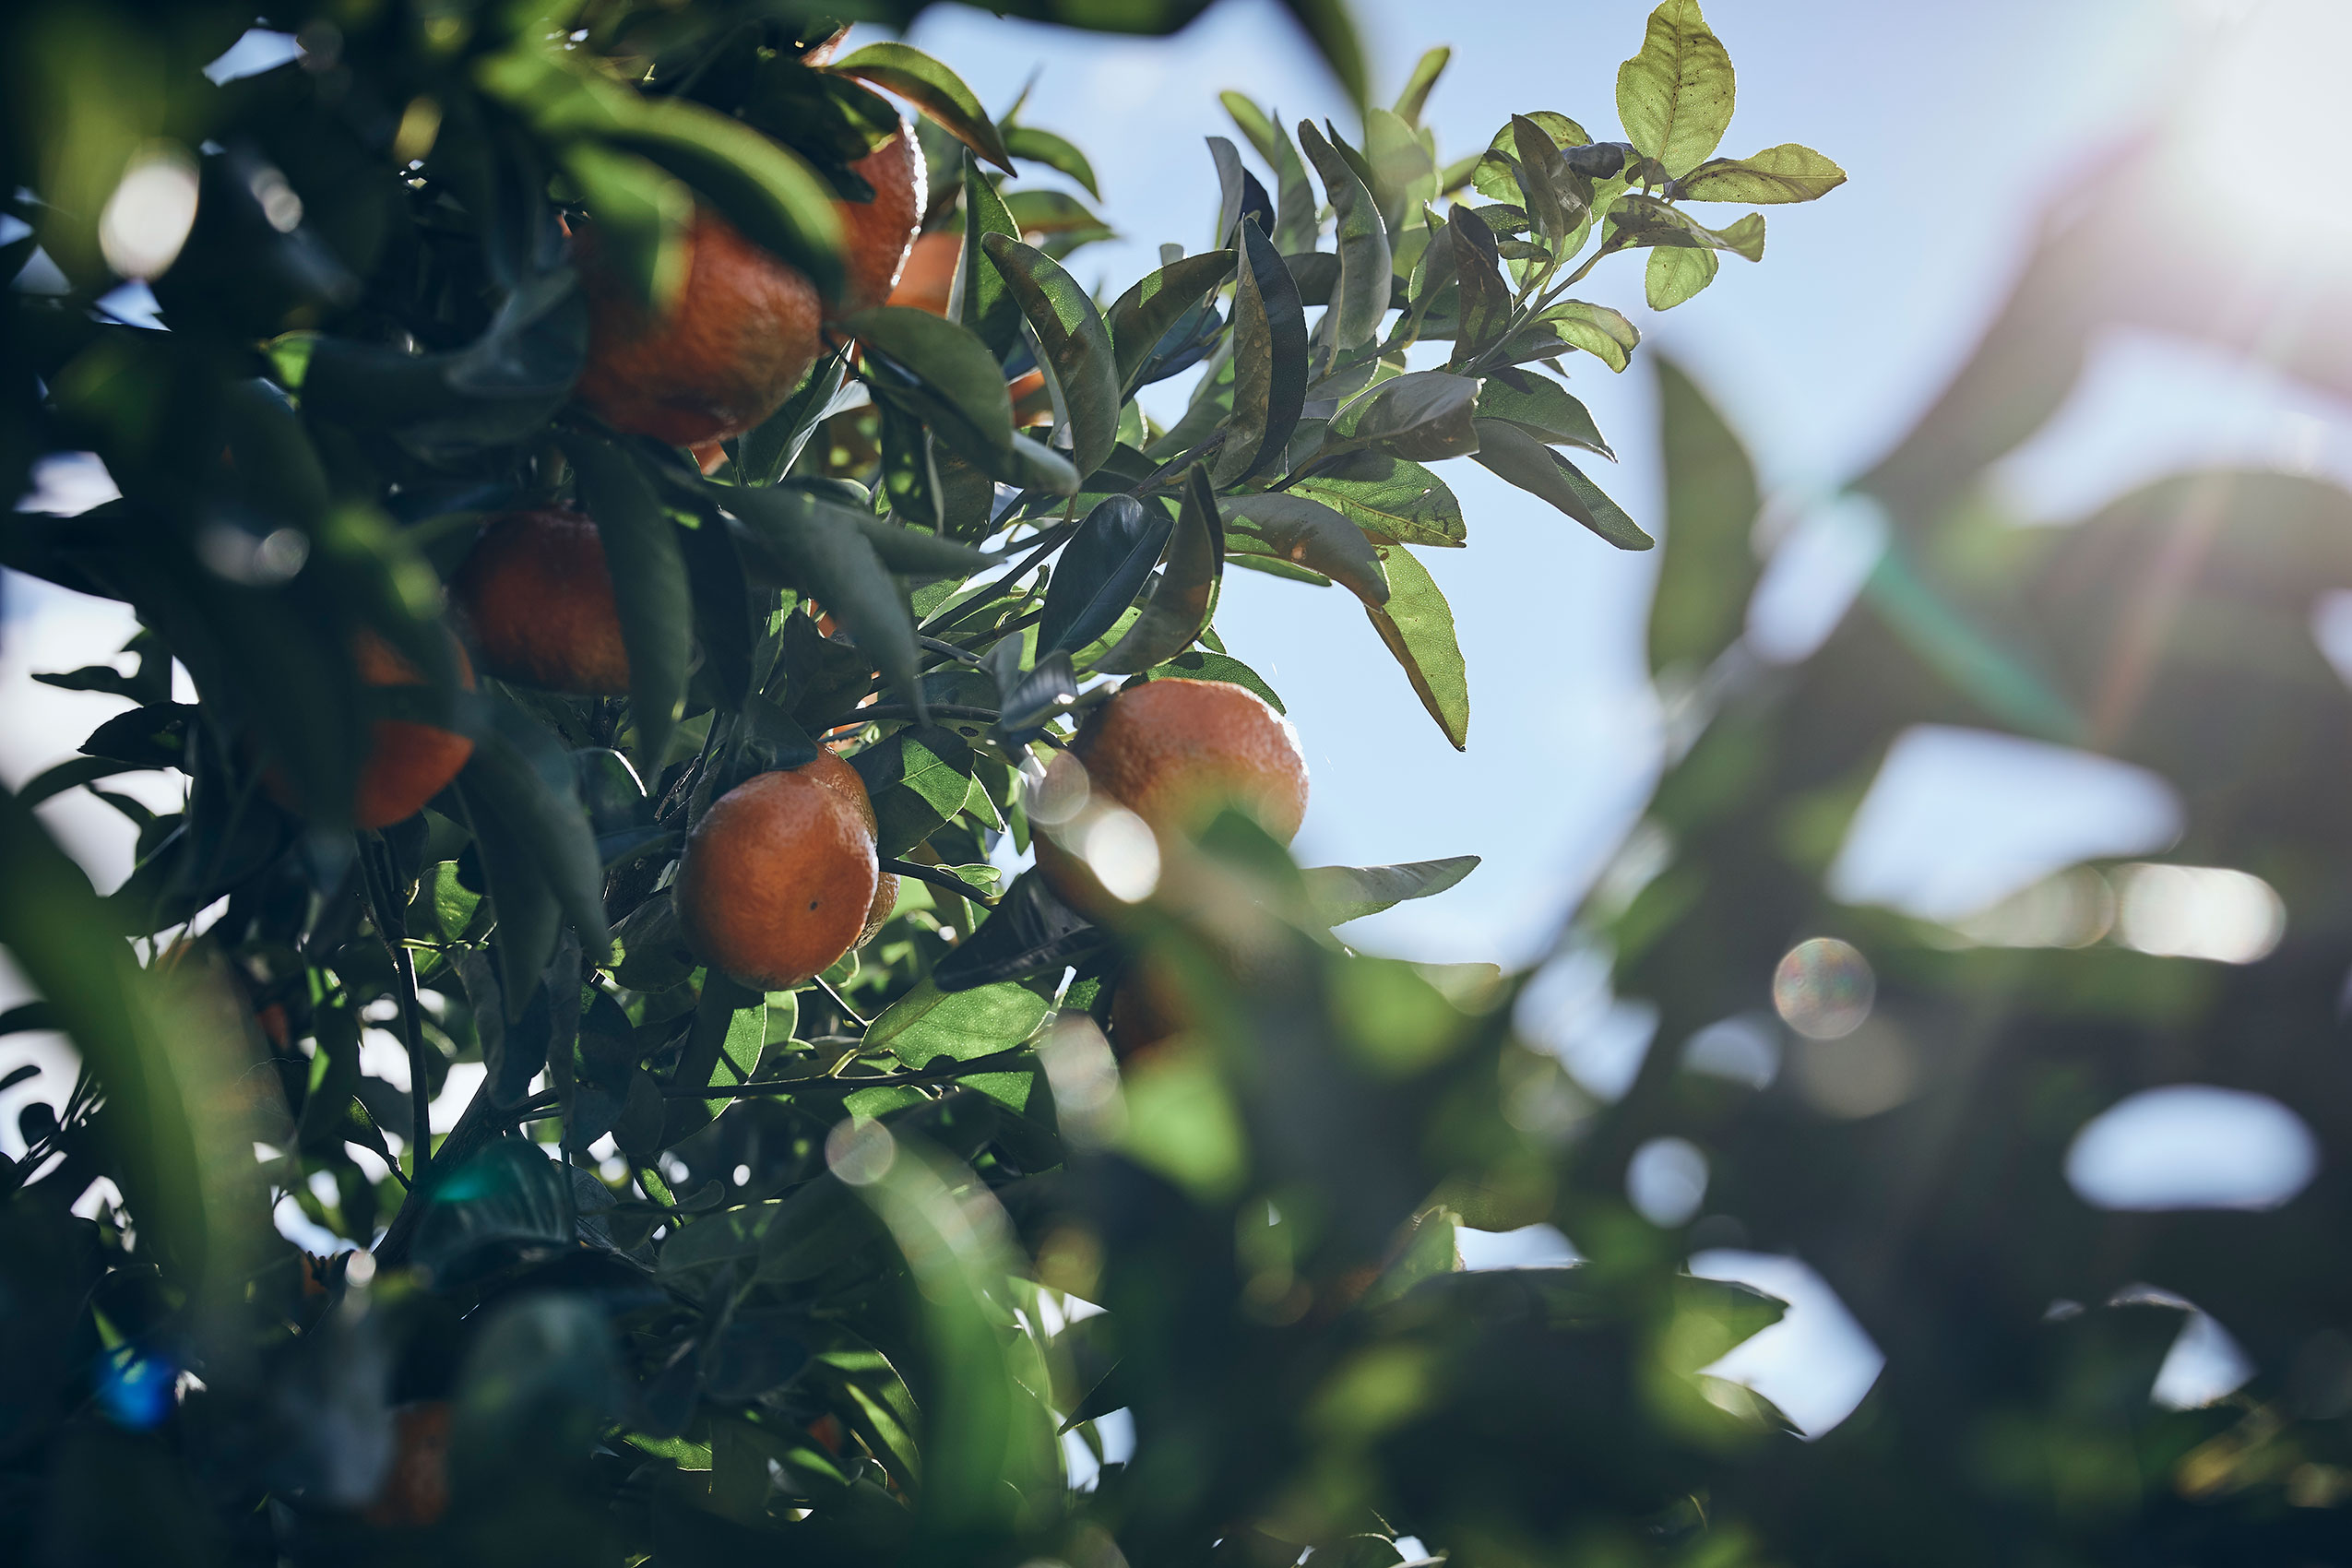 Shared Kitchen • Vibrant Mandarin Oranges Growing on Tree Against Blue Sky • Lifestyle & Editorial Food Photography